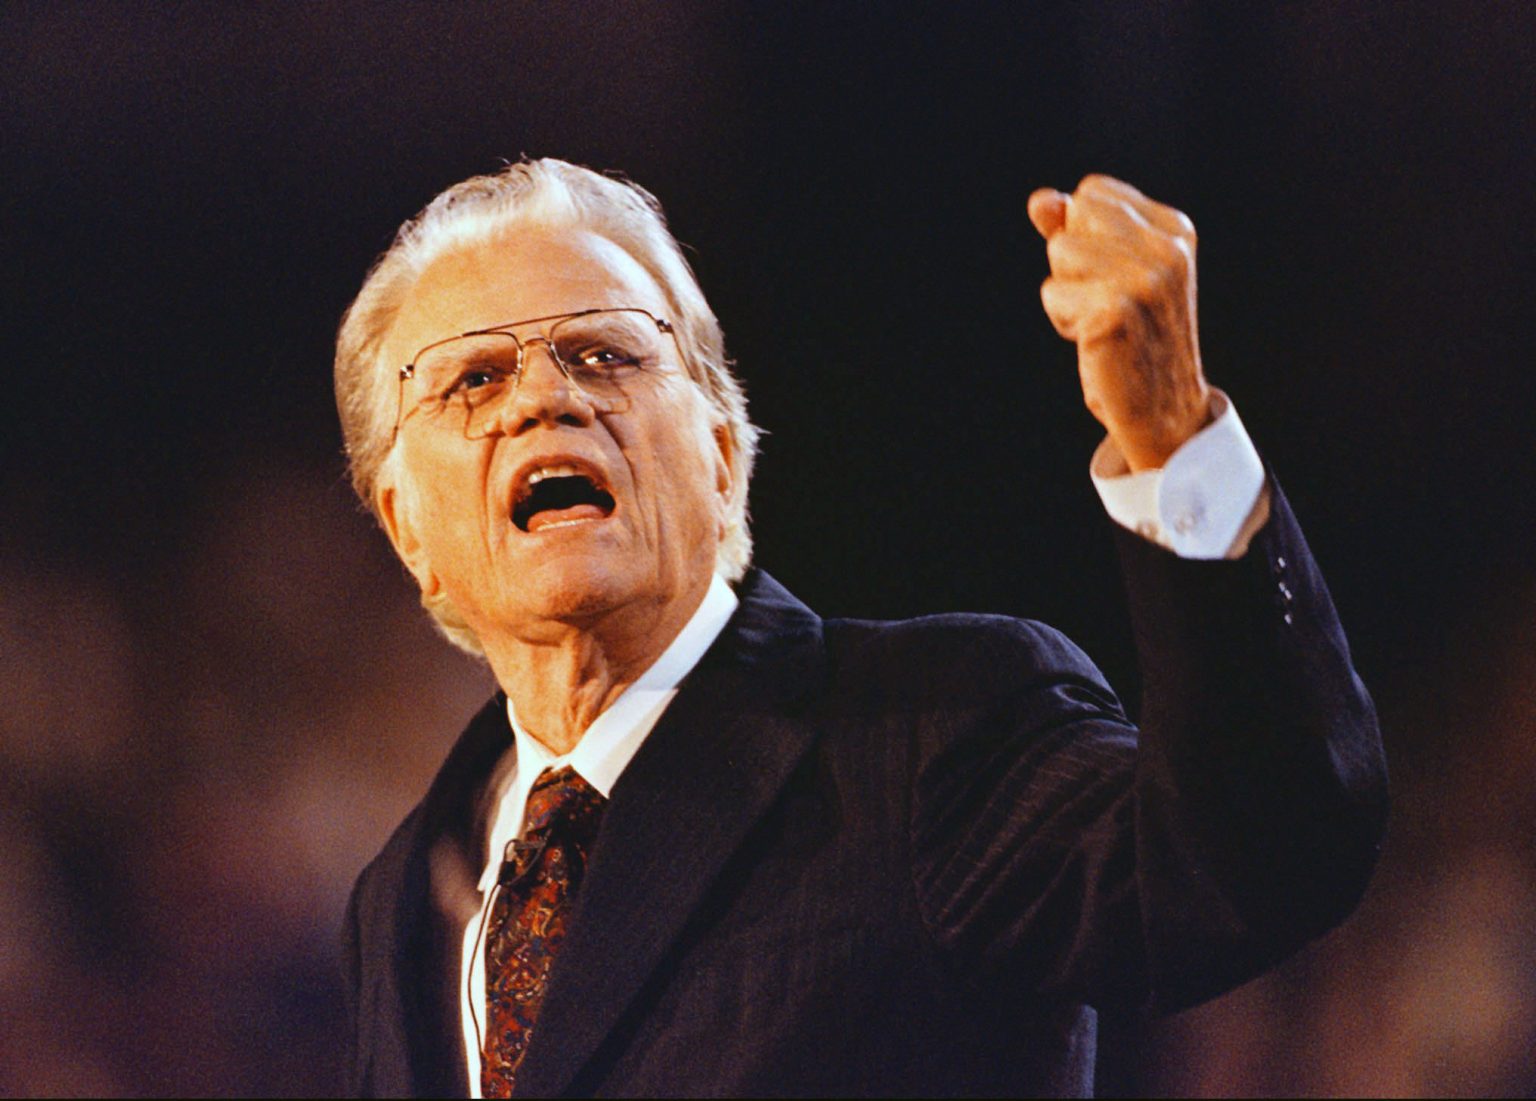 DOWNLOAD MP3: The Danger of Neutrality by Evangelist BILLY GRAHAM (Sermon) 18